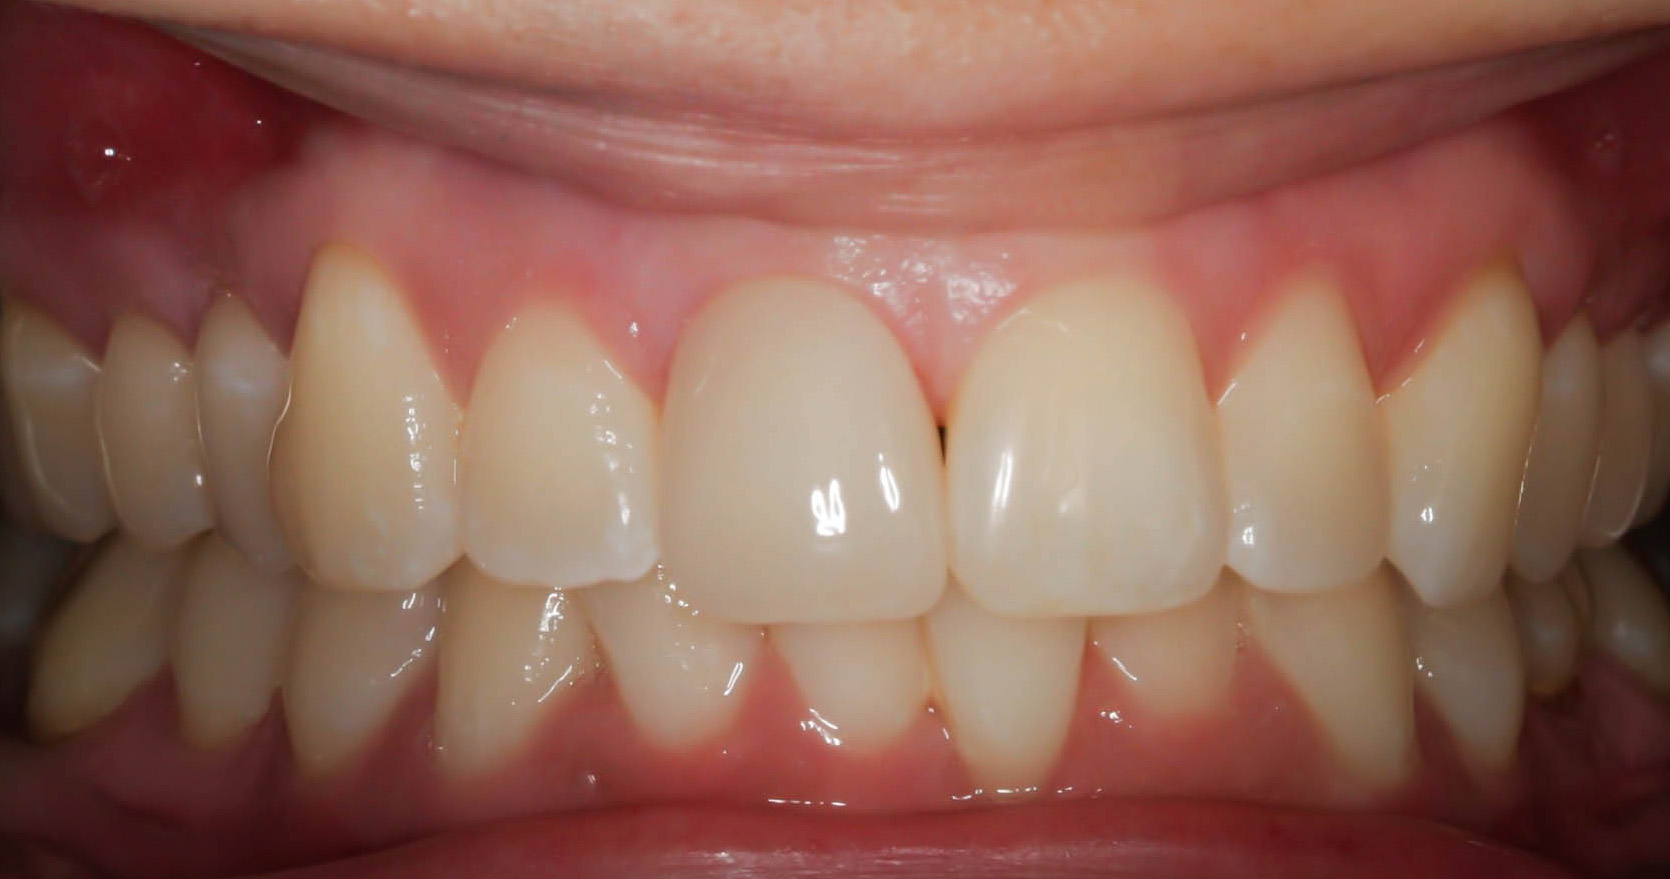 Single tooth crown to enhance esthetics -- the After photo